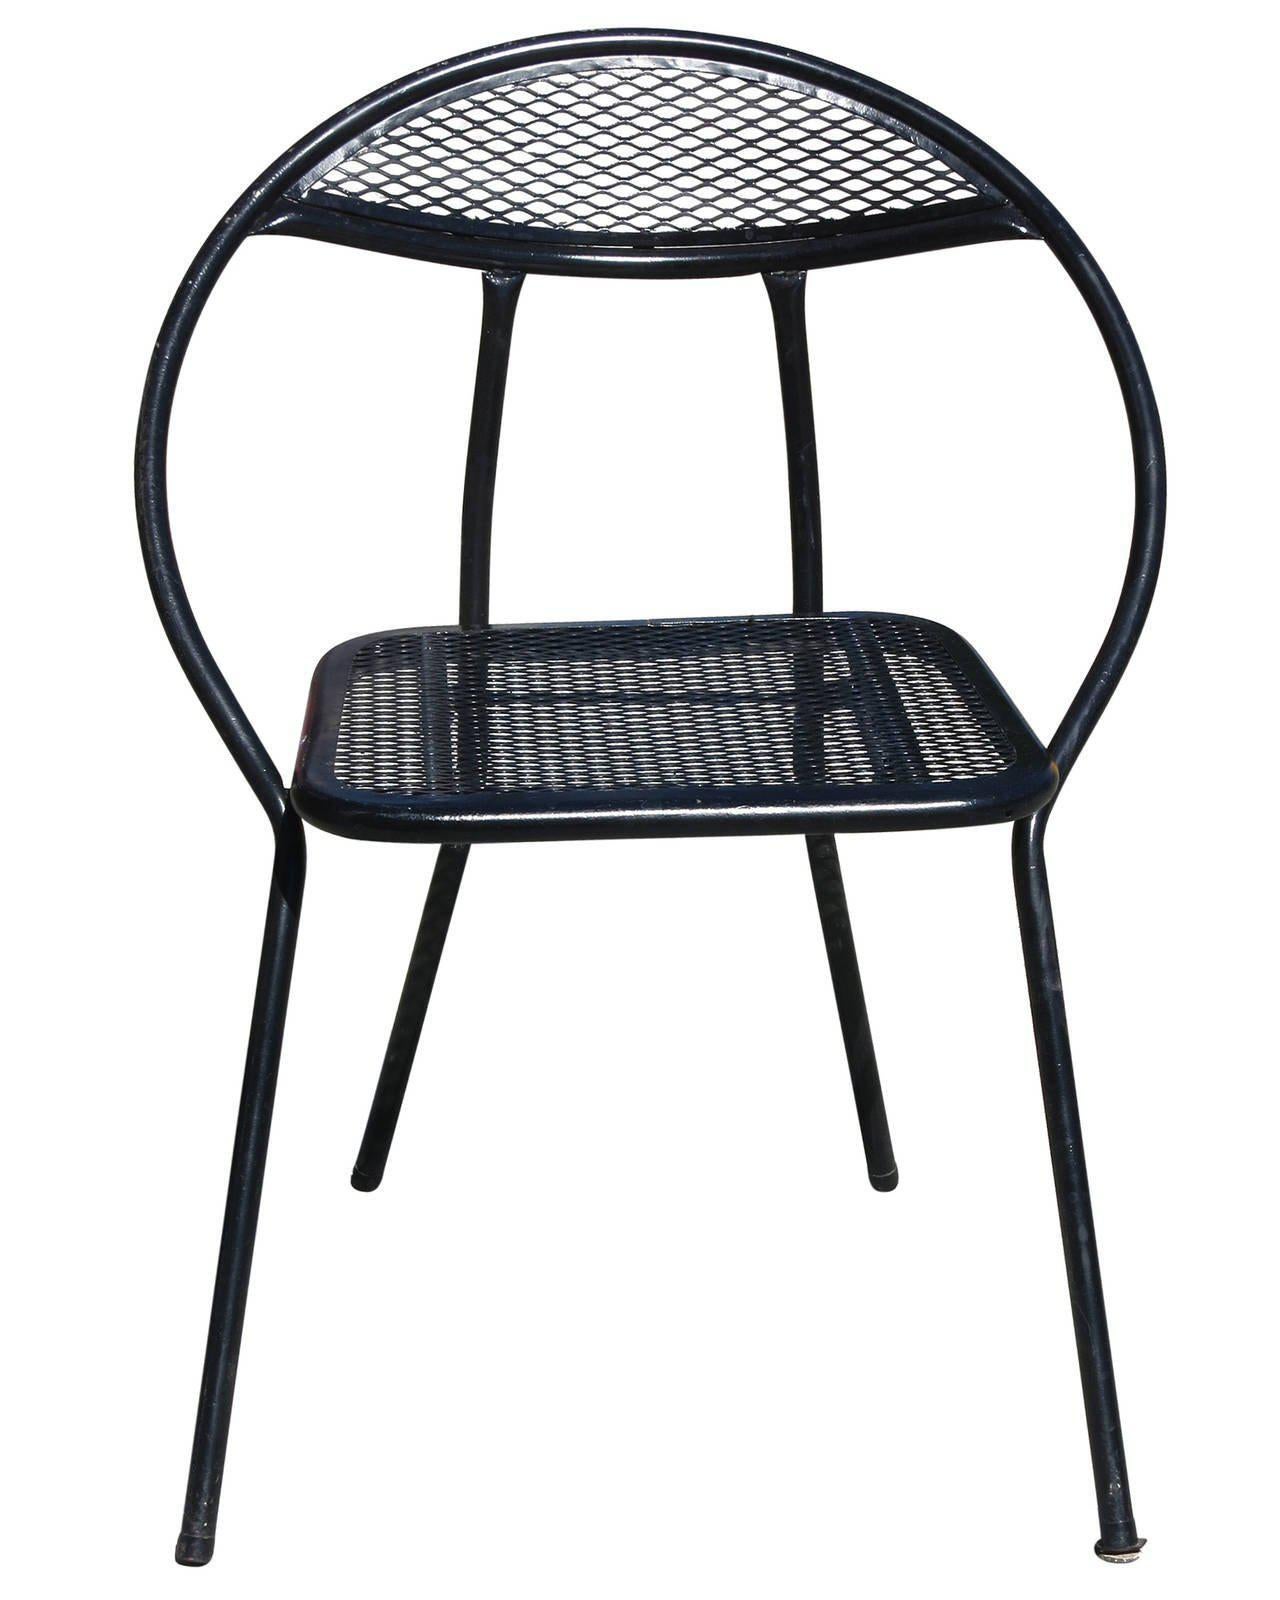 This Mid-Century Modern outdoor dining set by Salterini features four rounded-back, folding chairs and a square dining table with a hole in the center for an umbrella. The table and chairs are made of a combination of mesh and tubular steel all have